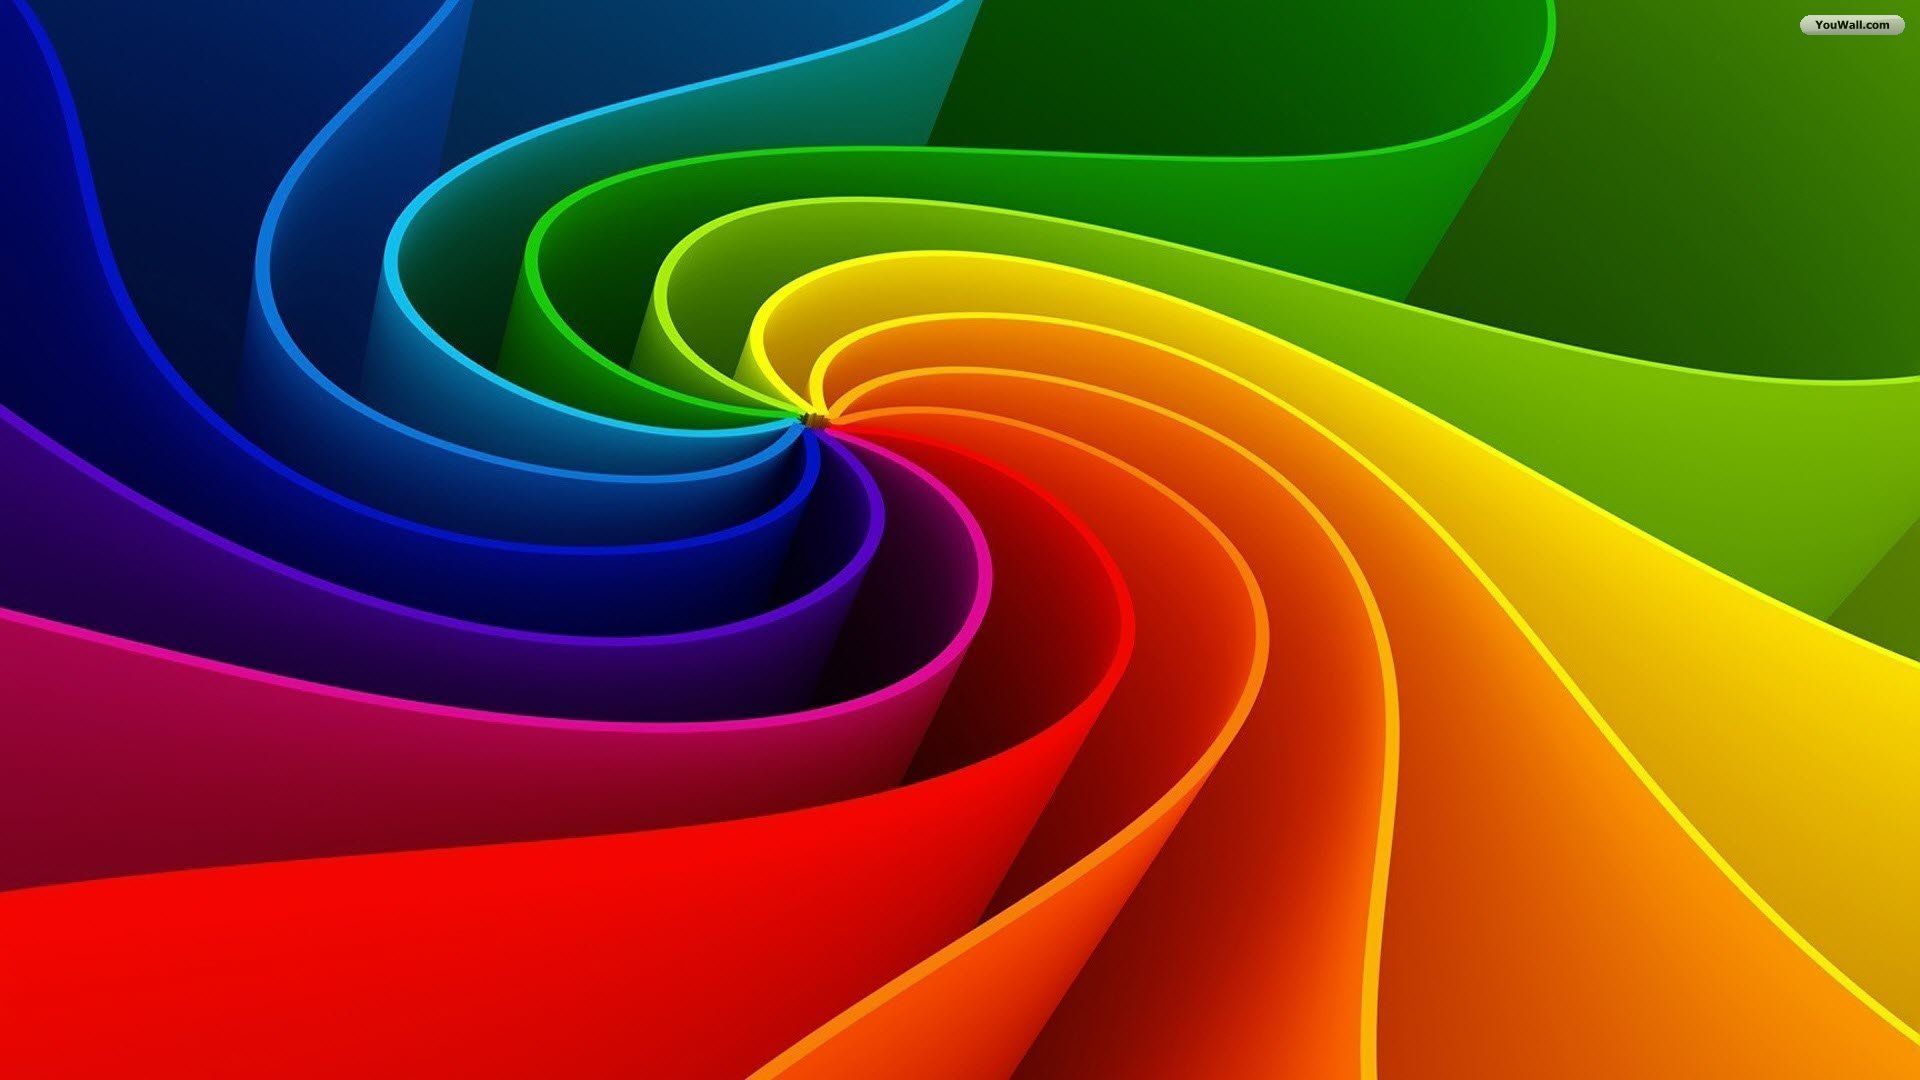 Top Abstract Rainbow Background Wallpaper Images for Pinterest